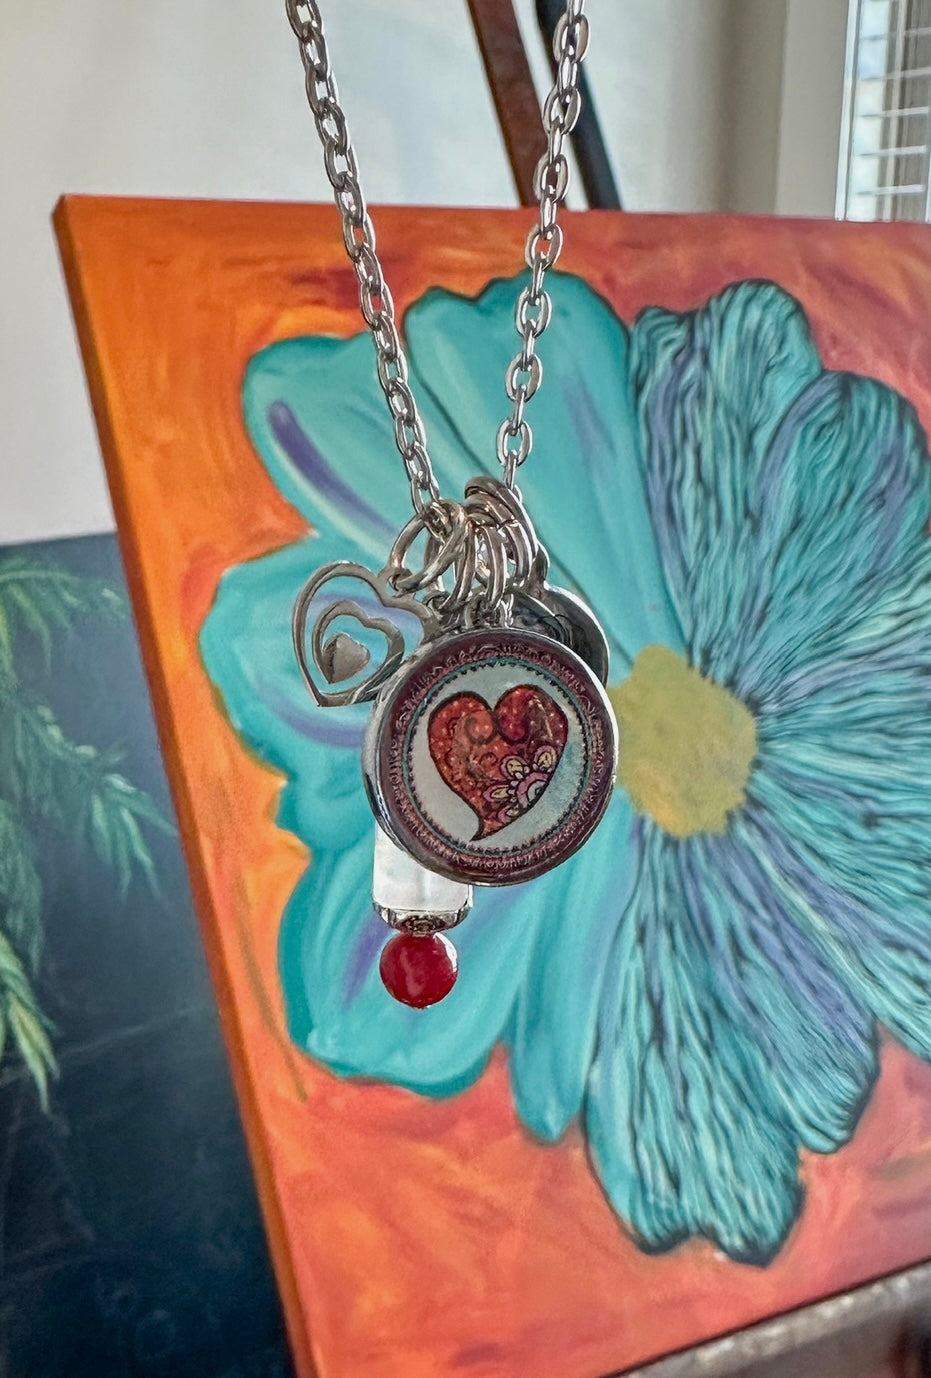 Load image into Gallery viewer, Spirit Lala: Teal Heart Statement Charm Necklace - SpiritedBoutiques Boho Hippie Boutique Style Necklace, Spirit Lala
